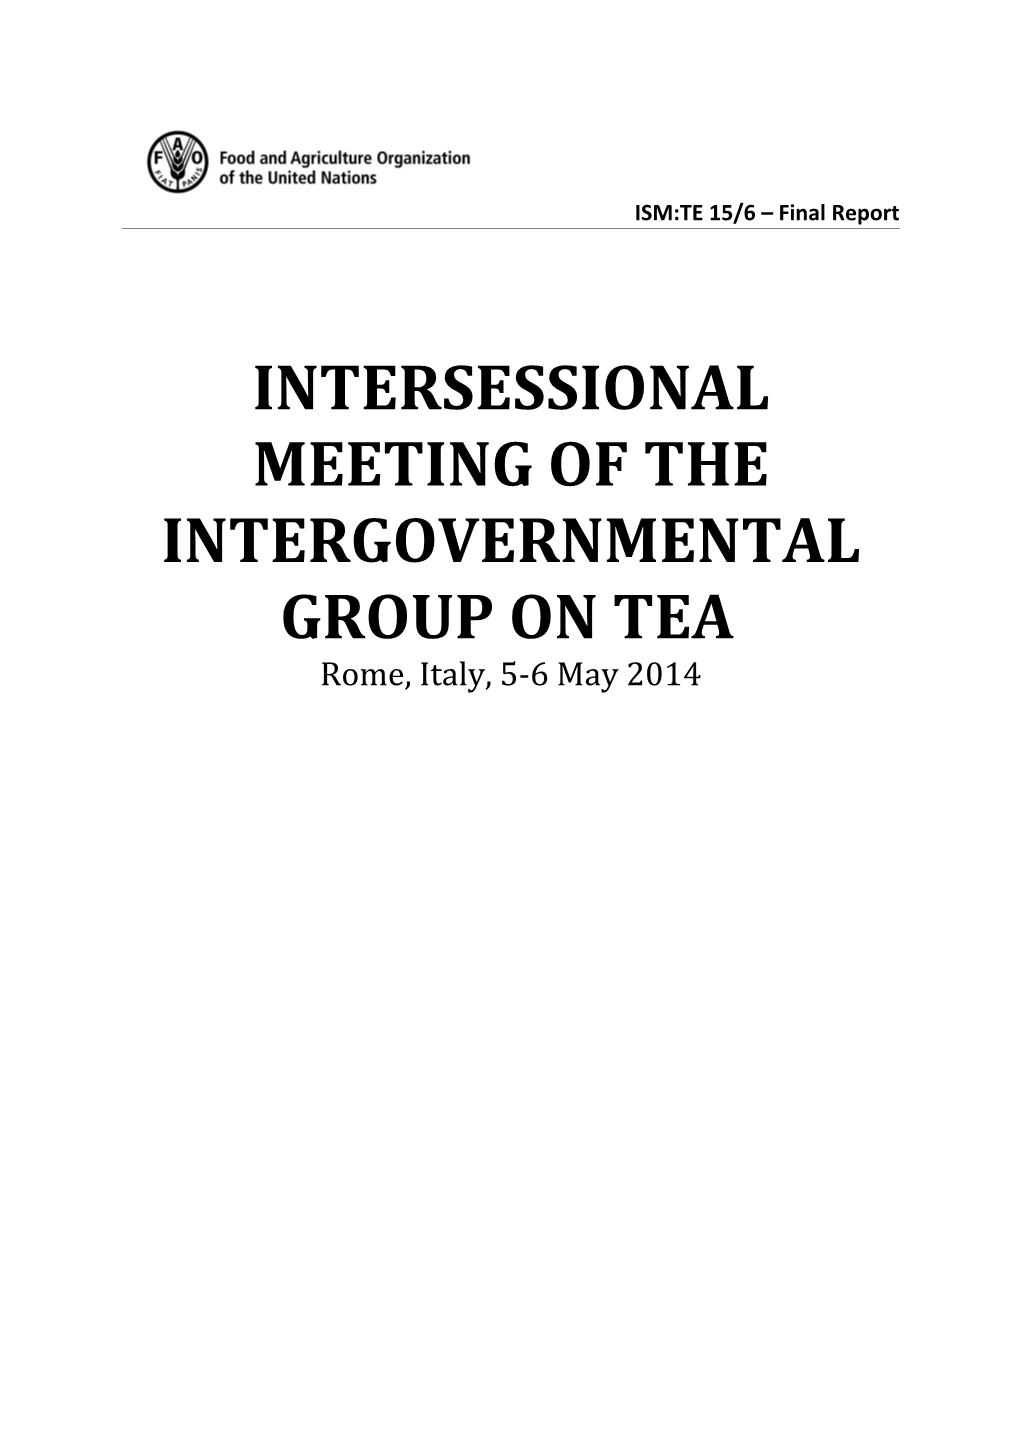 Intersessional Meeting of the Intergovernmental Group on Tea